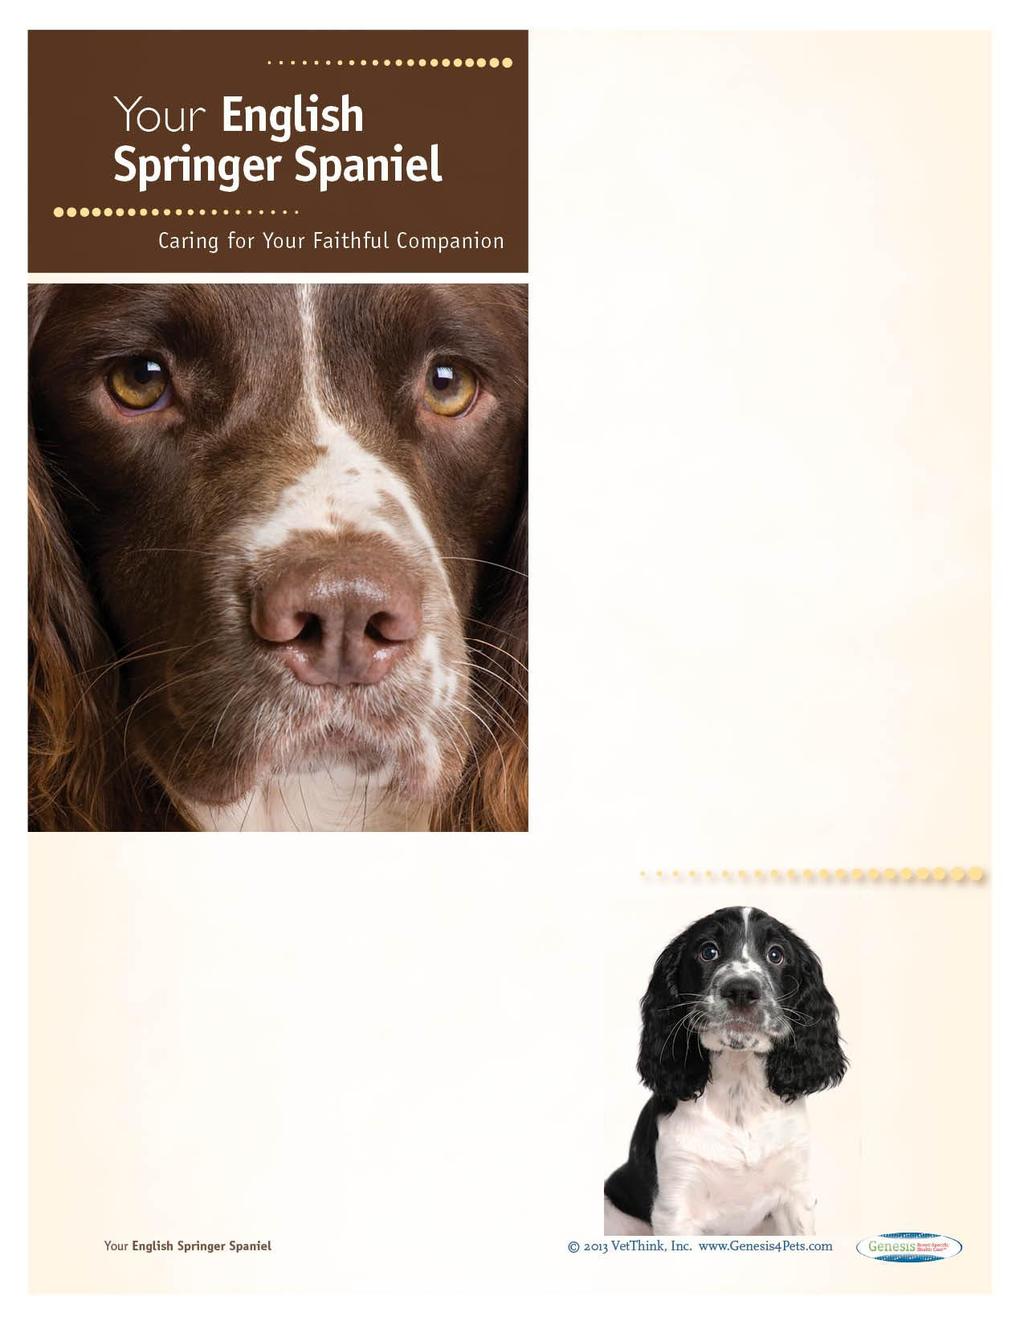 English Springer Spaniels: What a Unique Breed! Your dog is special! She's your best friend, companion, and a source of unconditional love.